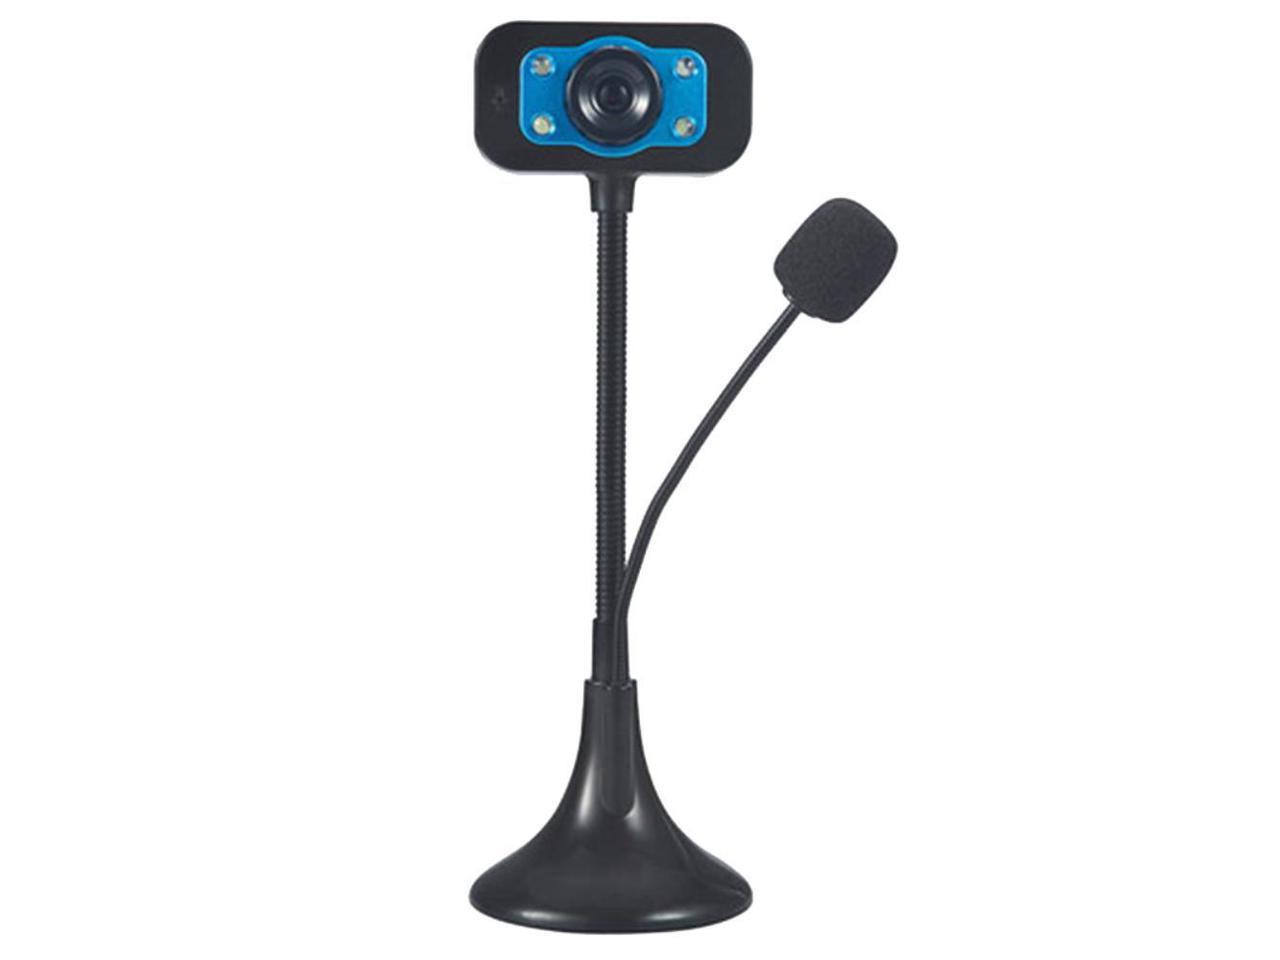 integrated microphone for skype calls